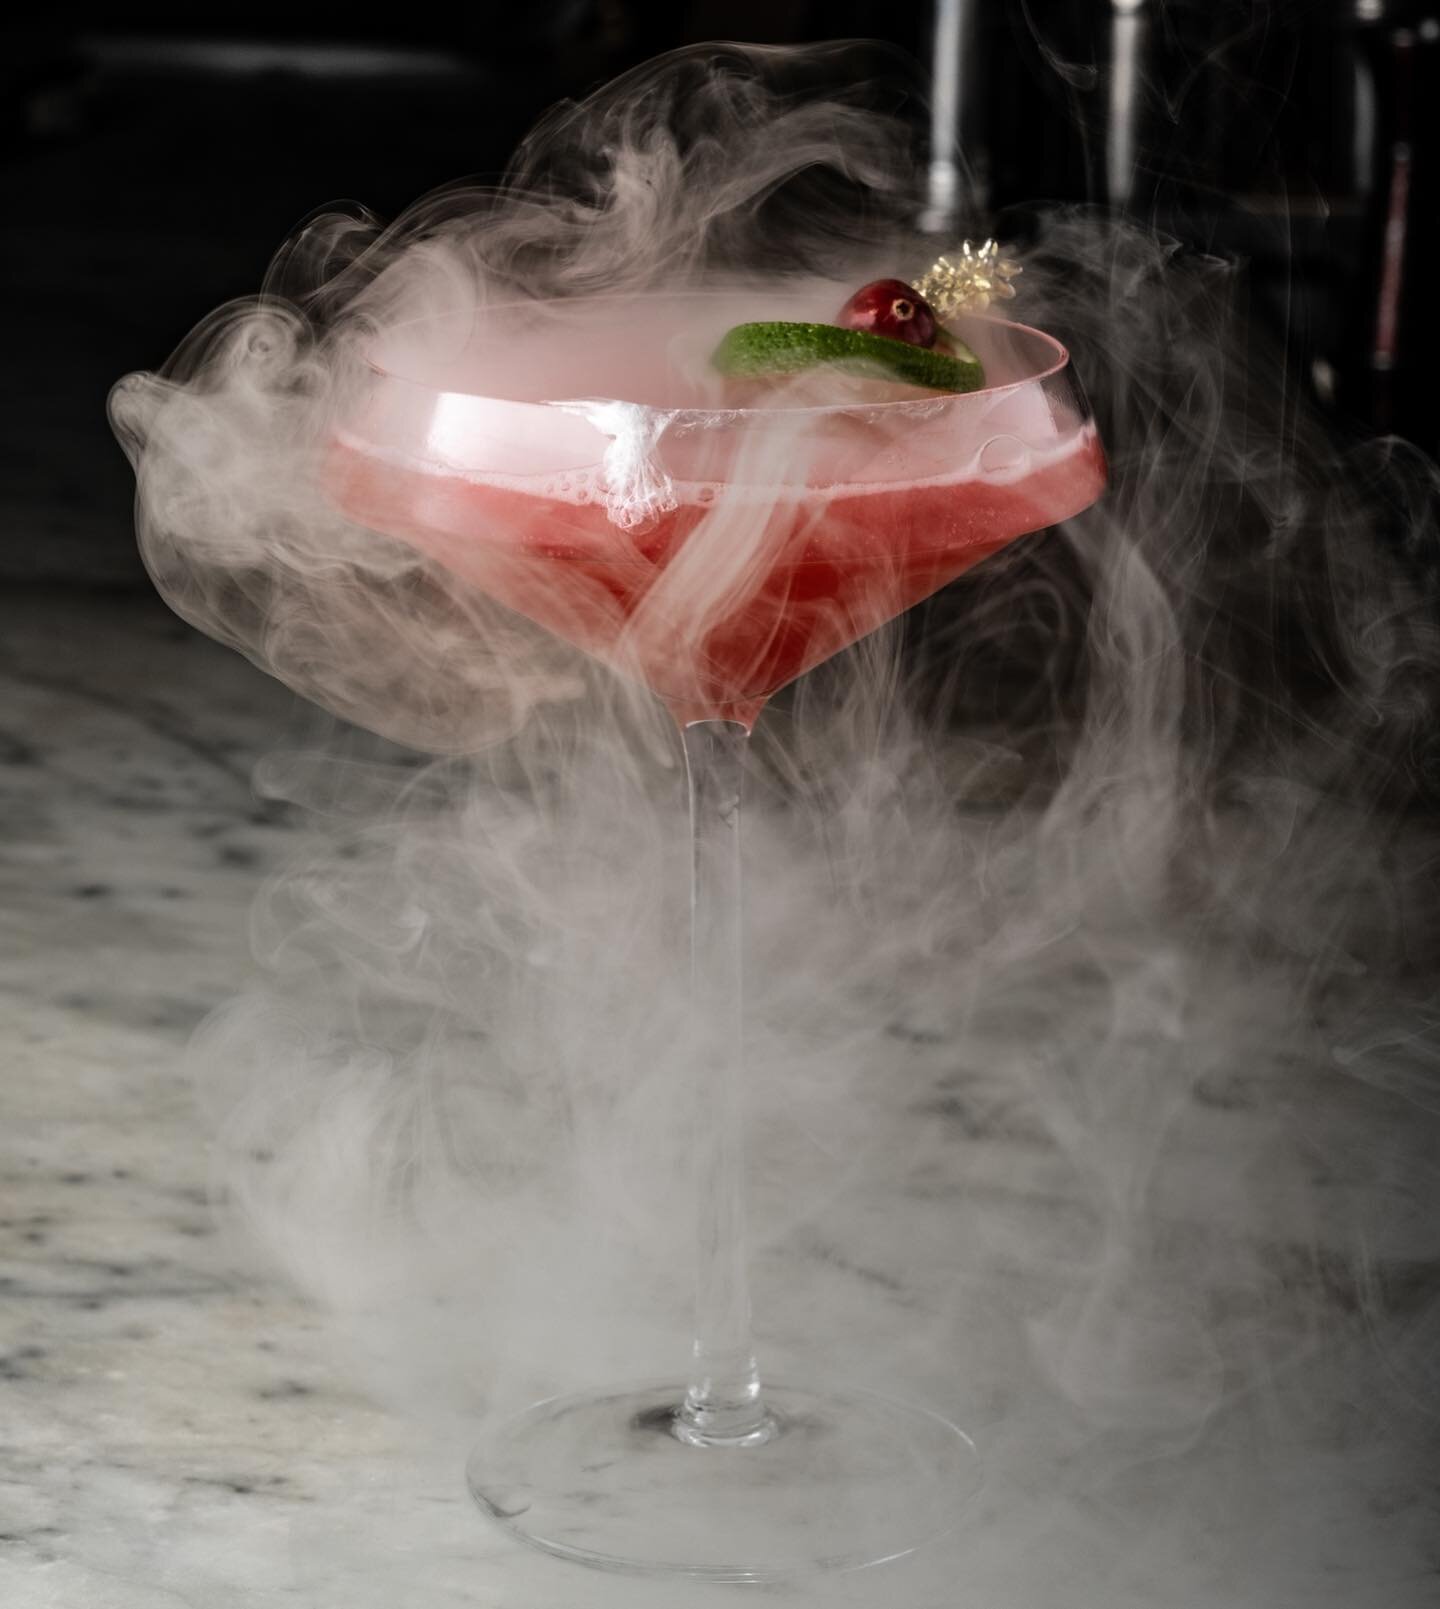 CRANMOPOLITAN
Hangar 1 Vodka, Local Cranberry Infused Campari, House Orange Blend, Lime, Strawberry Vapor

From our Chapter 8 menu: Autumn Flavors of New England